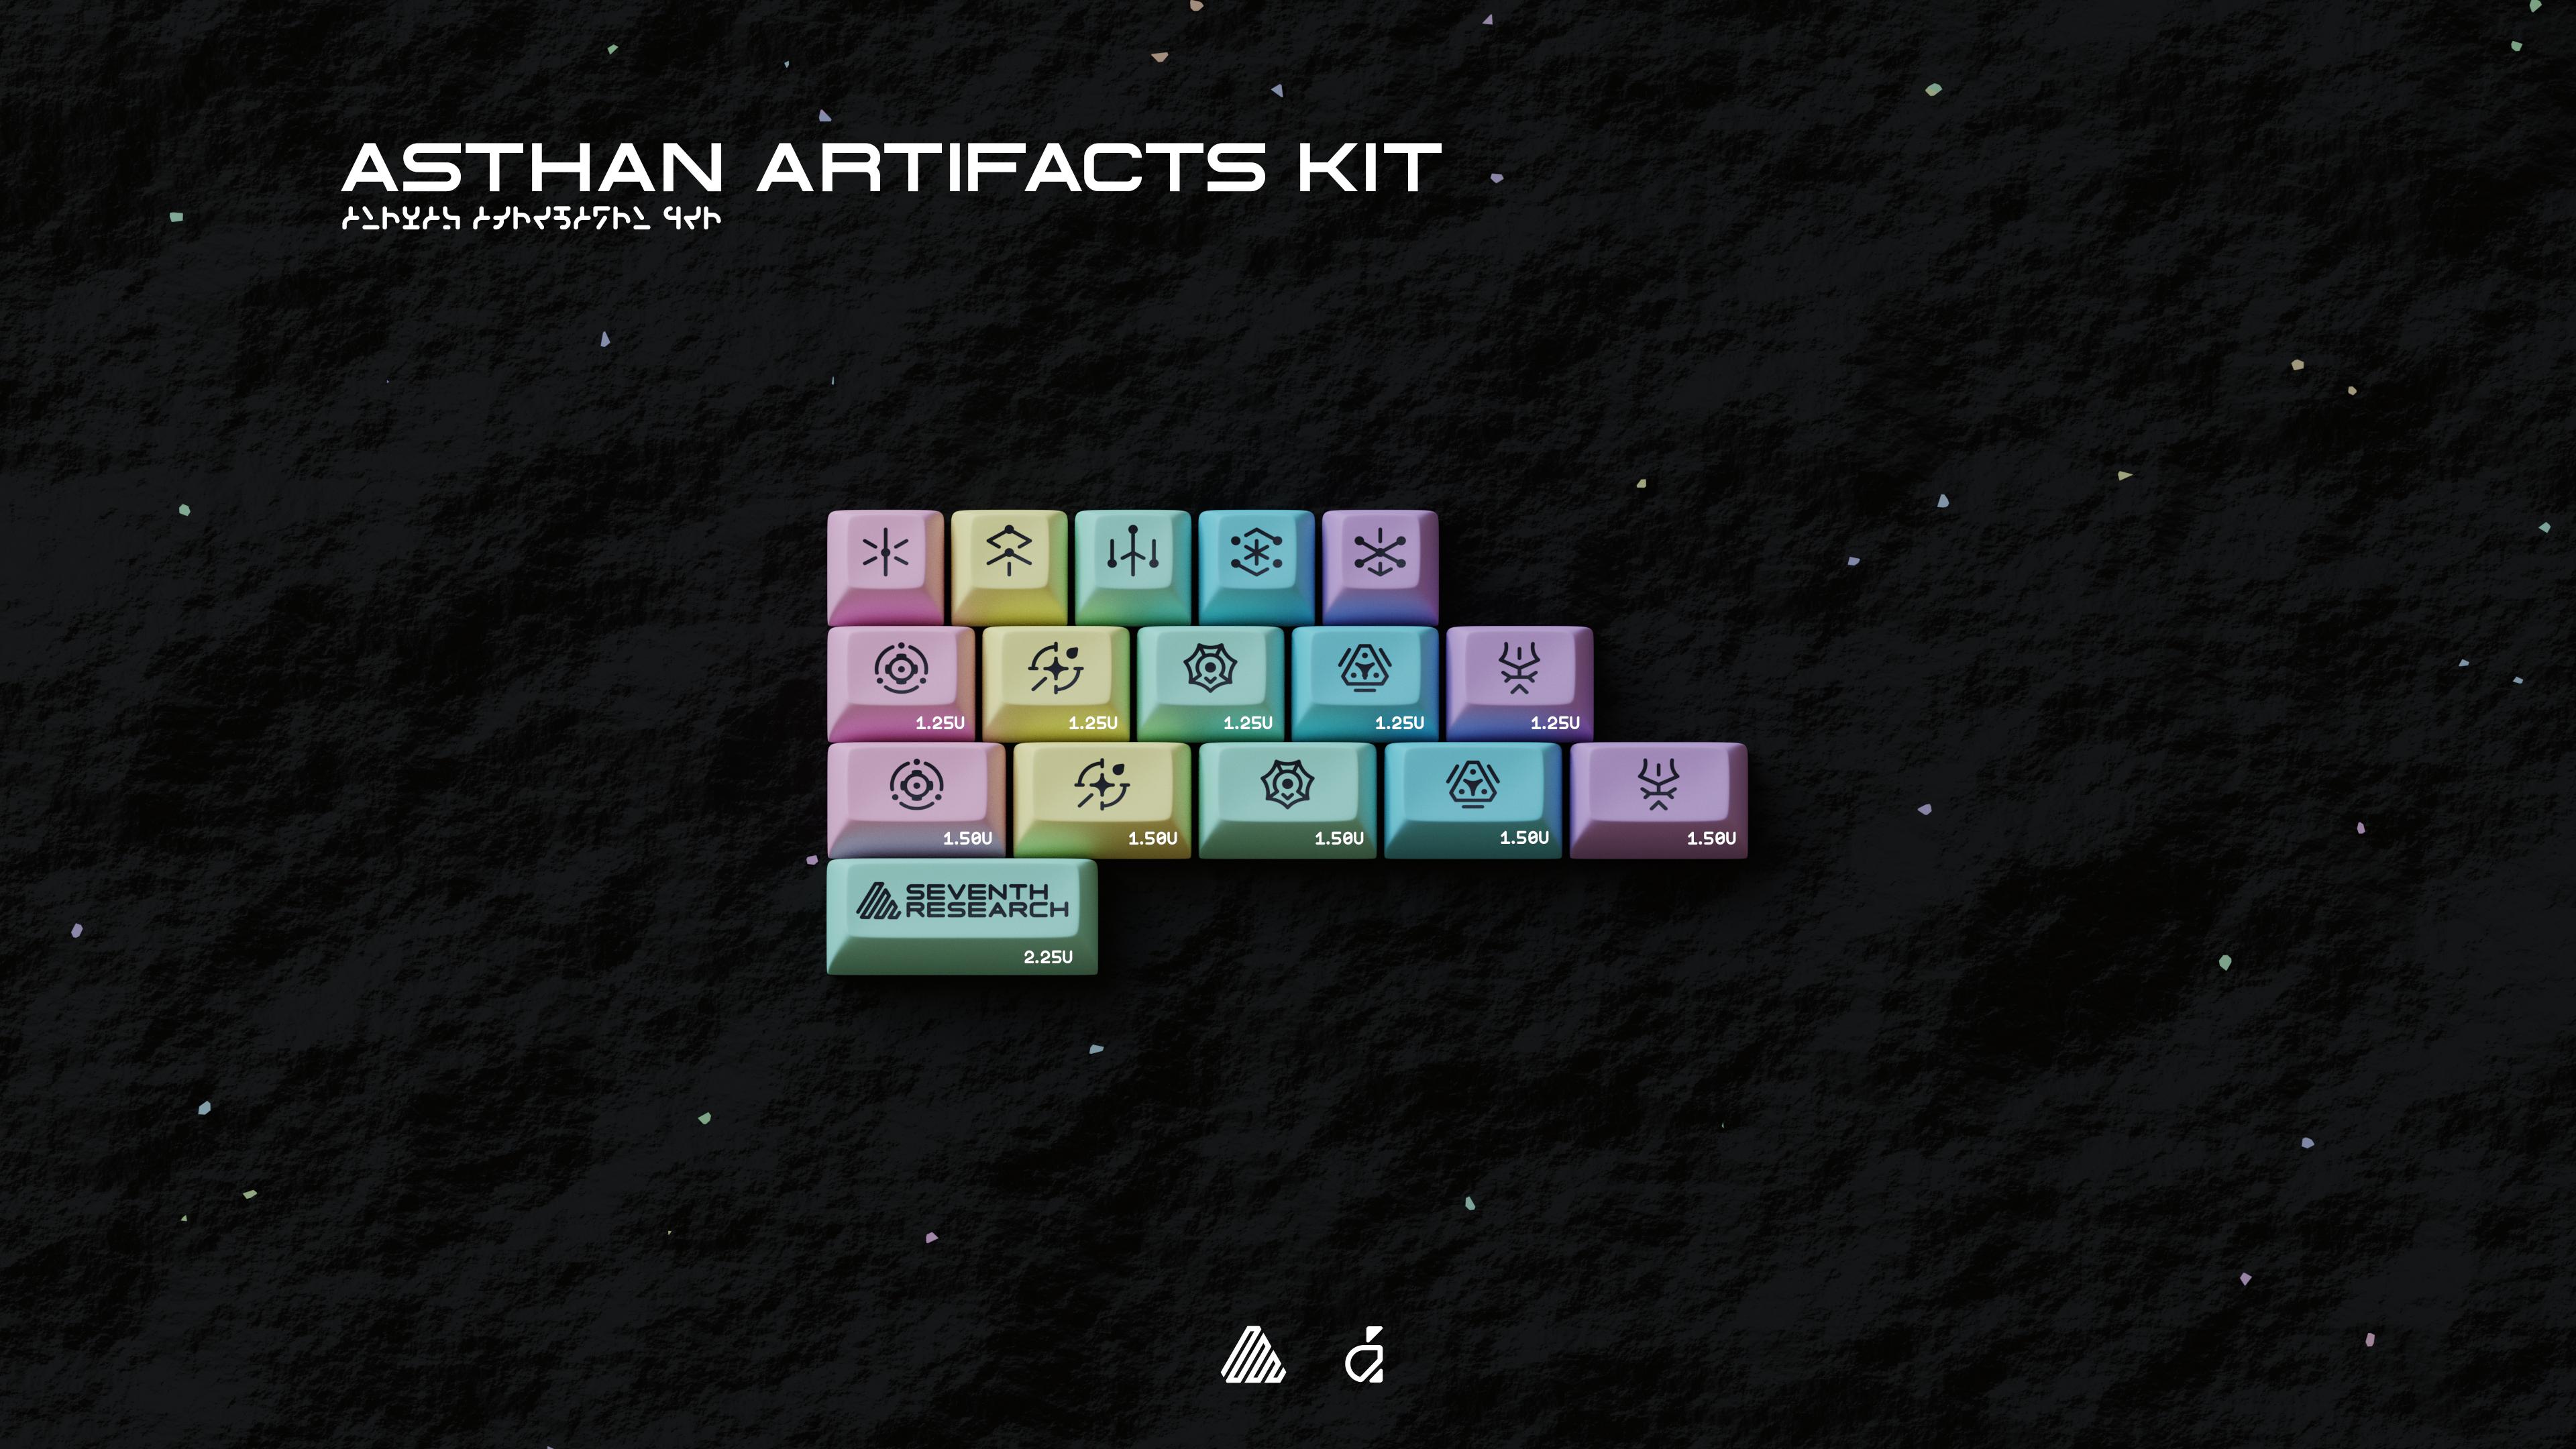 KAM ASTHA Thickened PBT Keycaps-Asthan Artifacts Kit